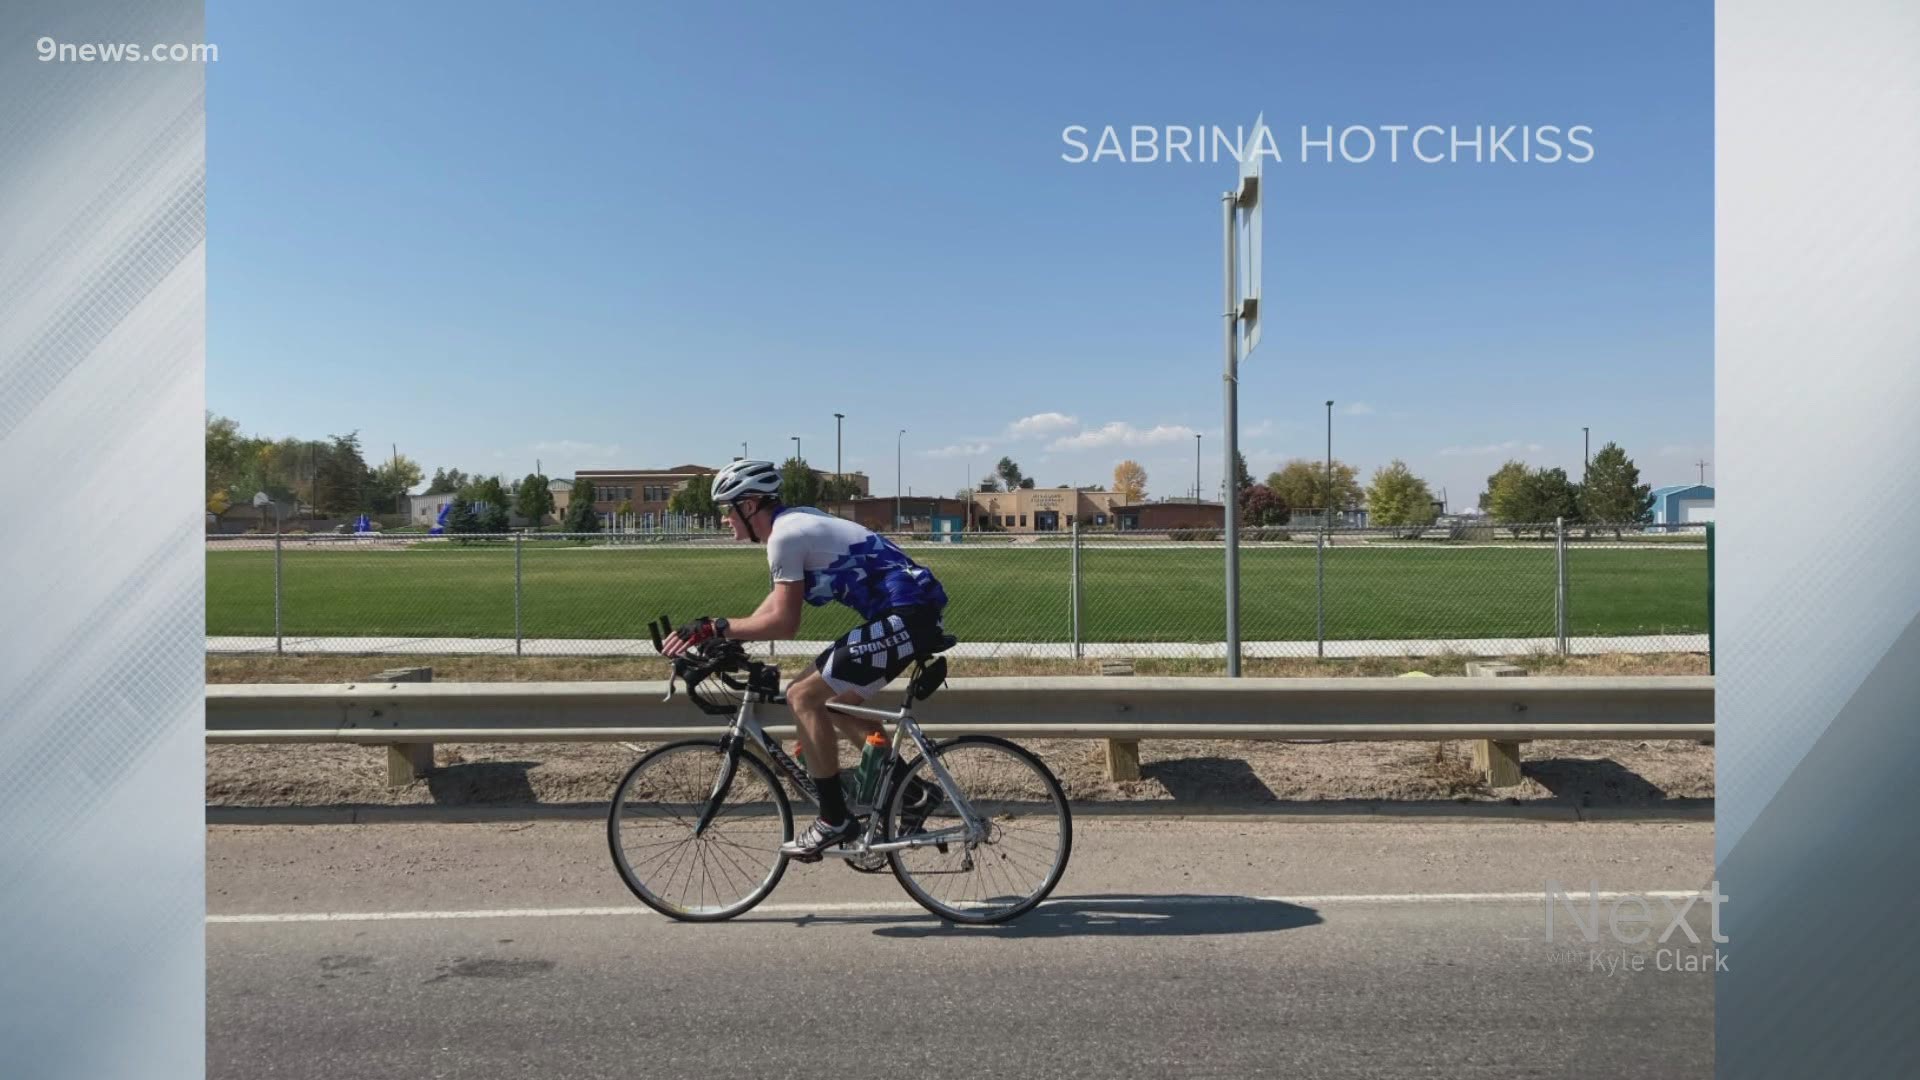 The official Ironman races Connor Hodes entered were canceled because of COVID, so he organized his own in Larimer County with friends and family.